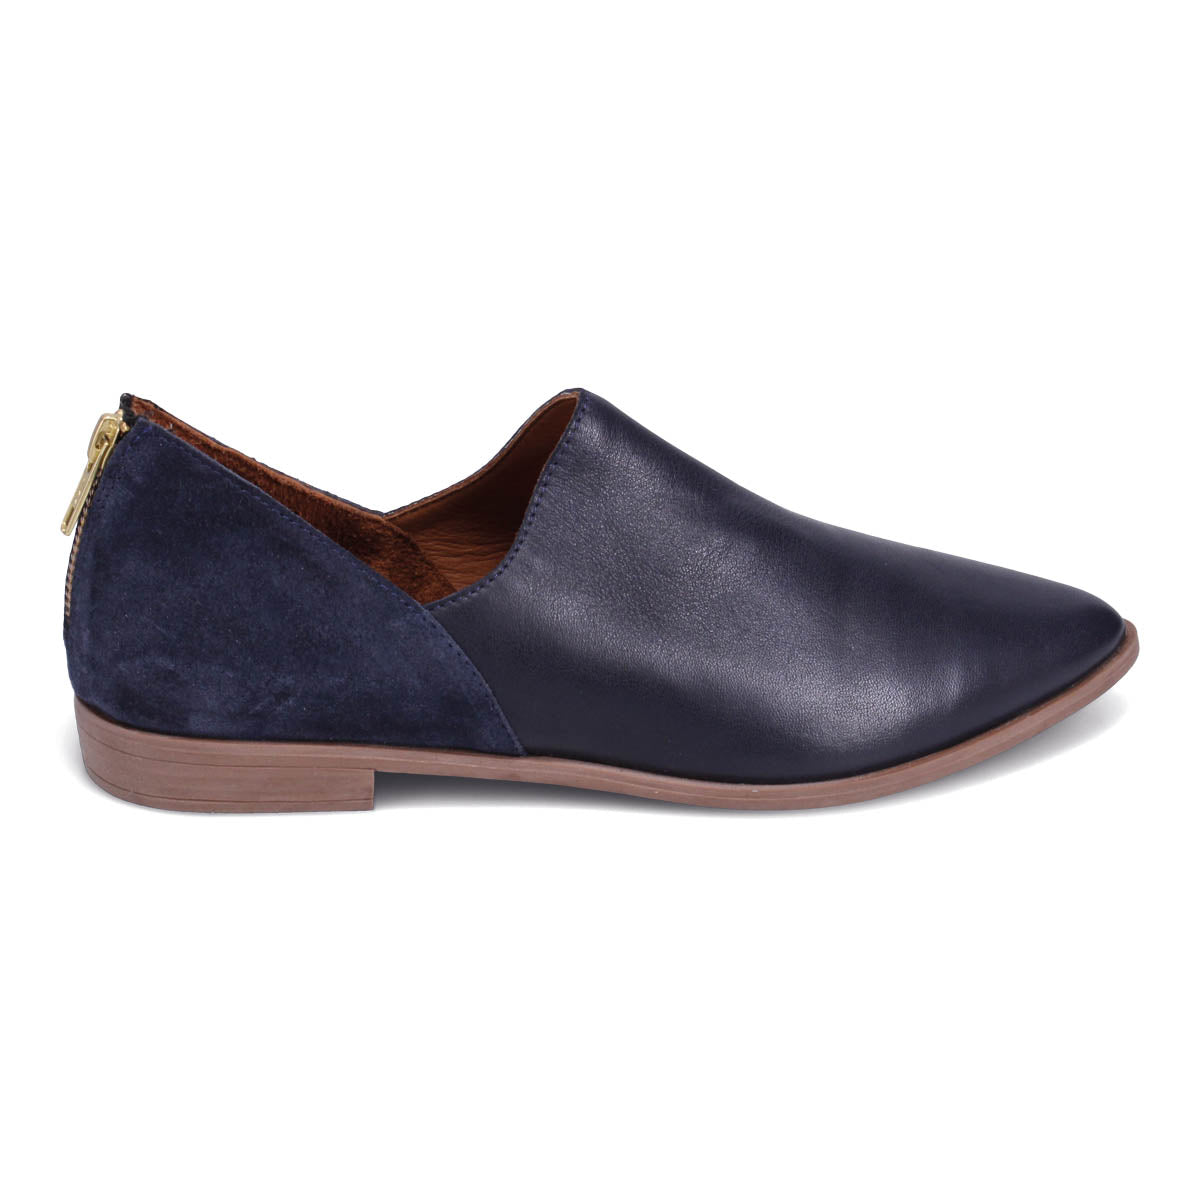 NAVY/NAVY SUEDE | Right